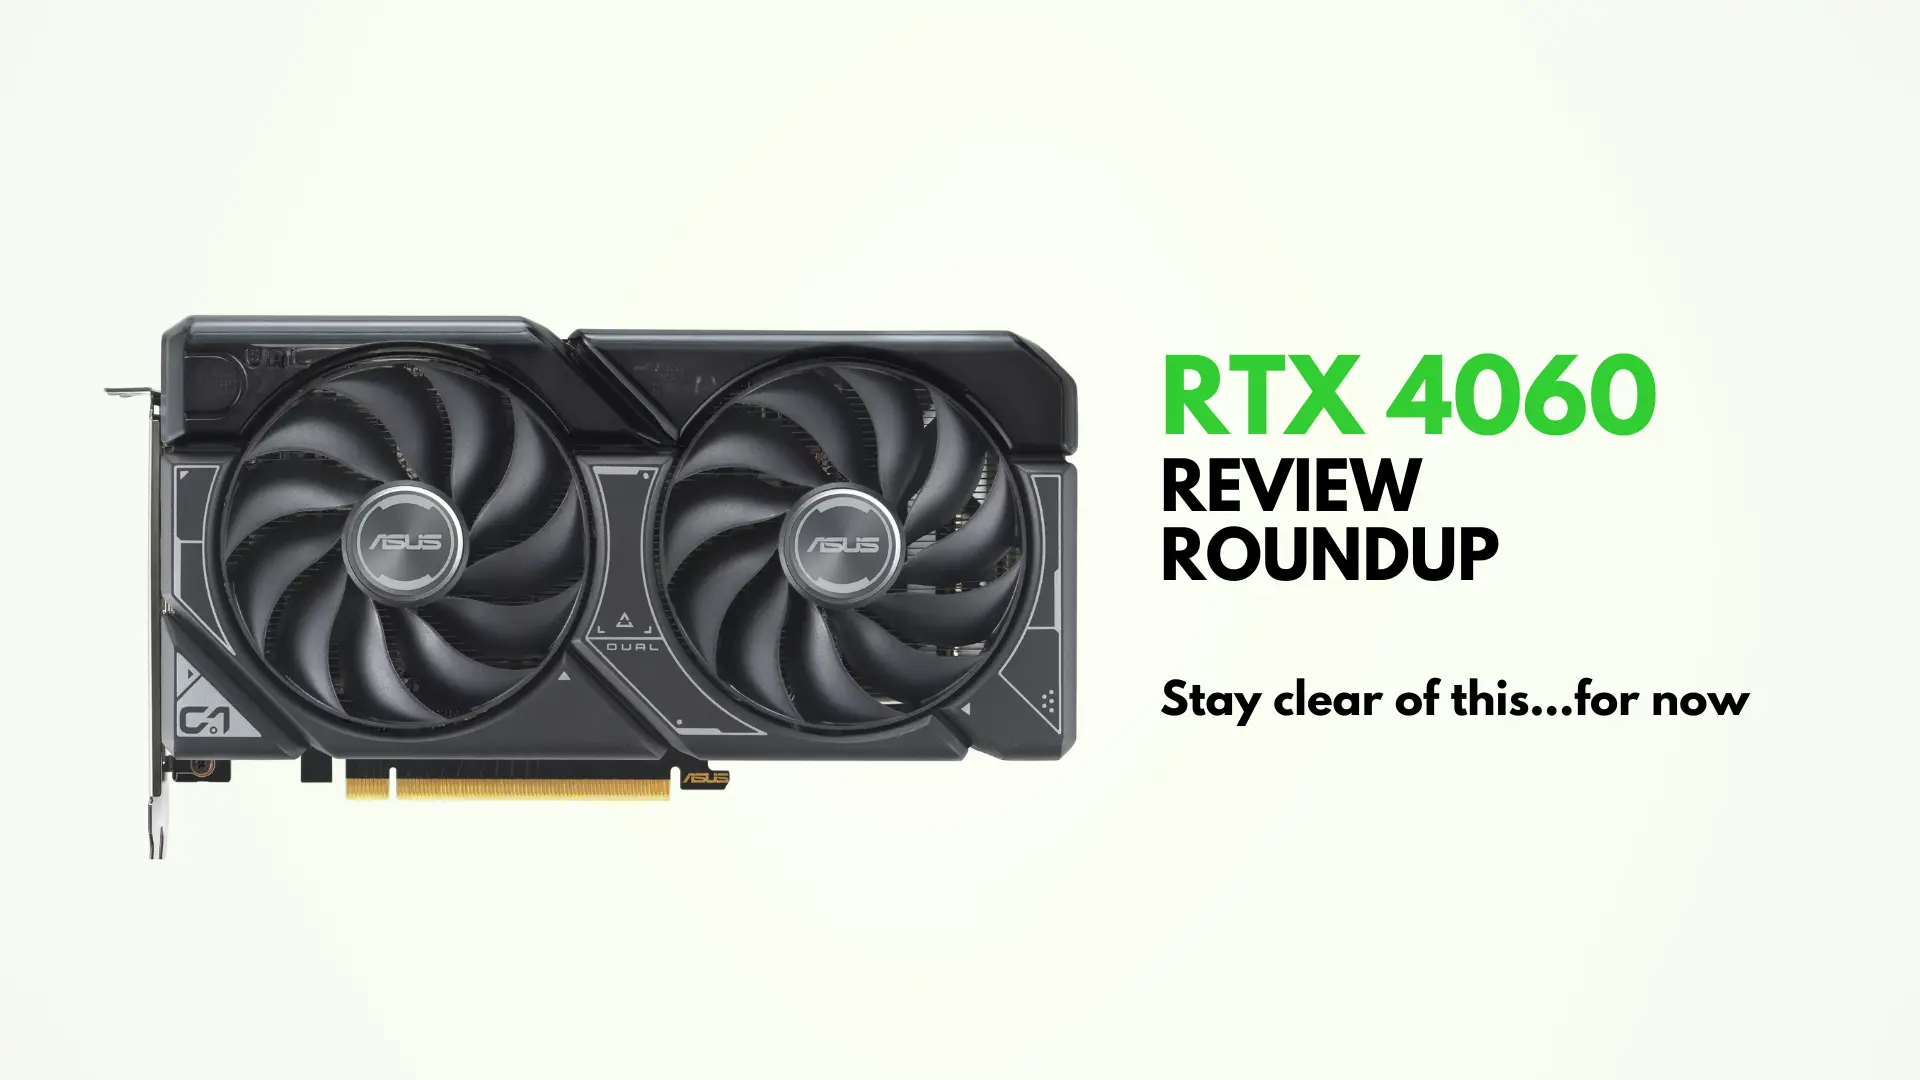 Nvidia RTX 4060 Review Roundup: Things aren’t looking good for Nvidia